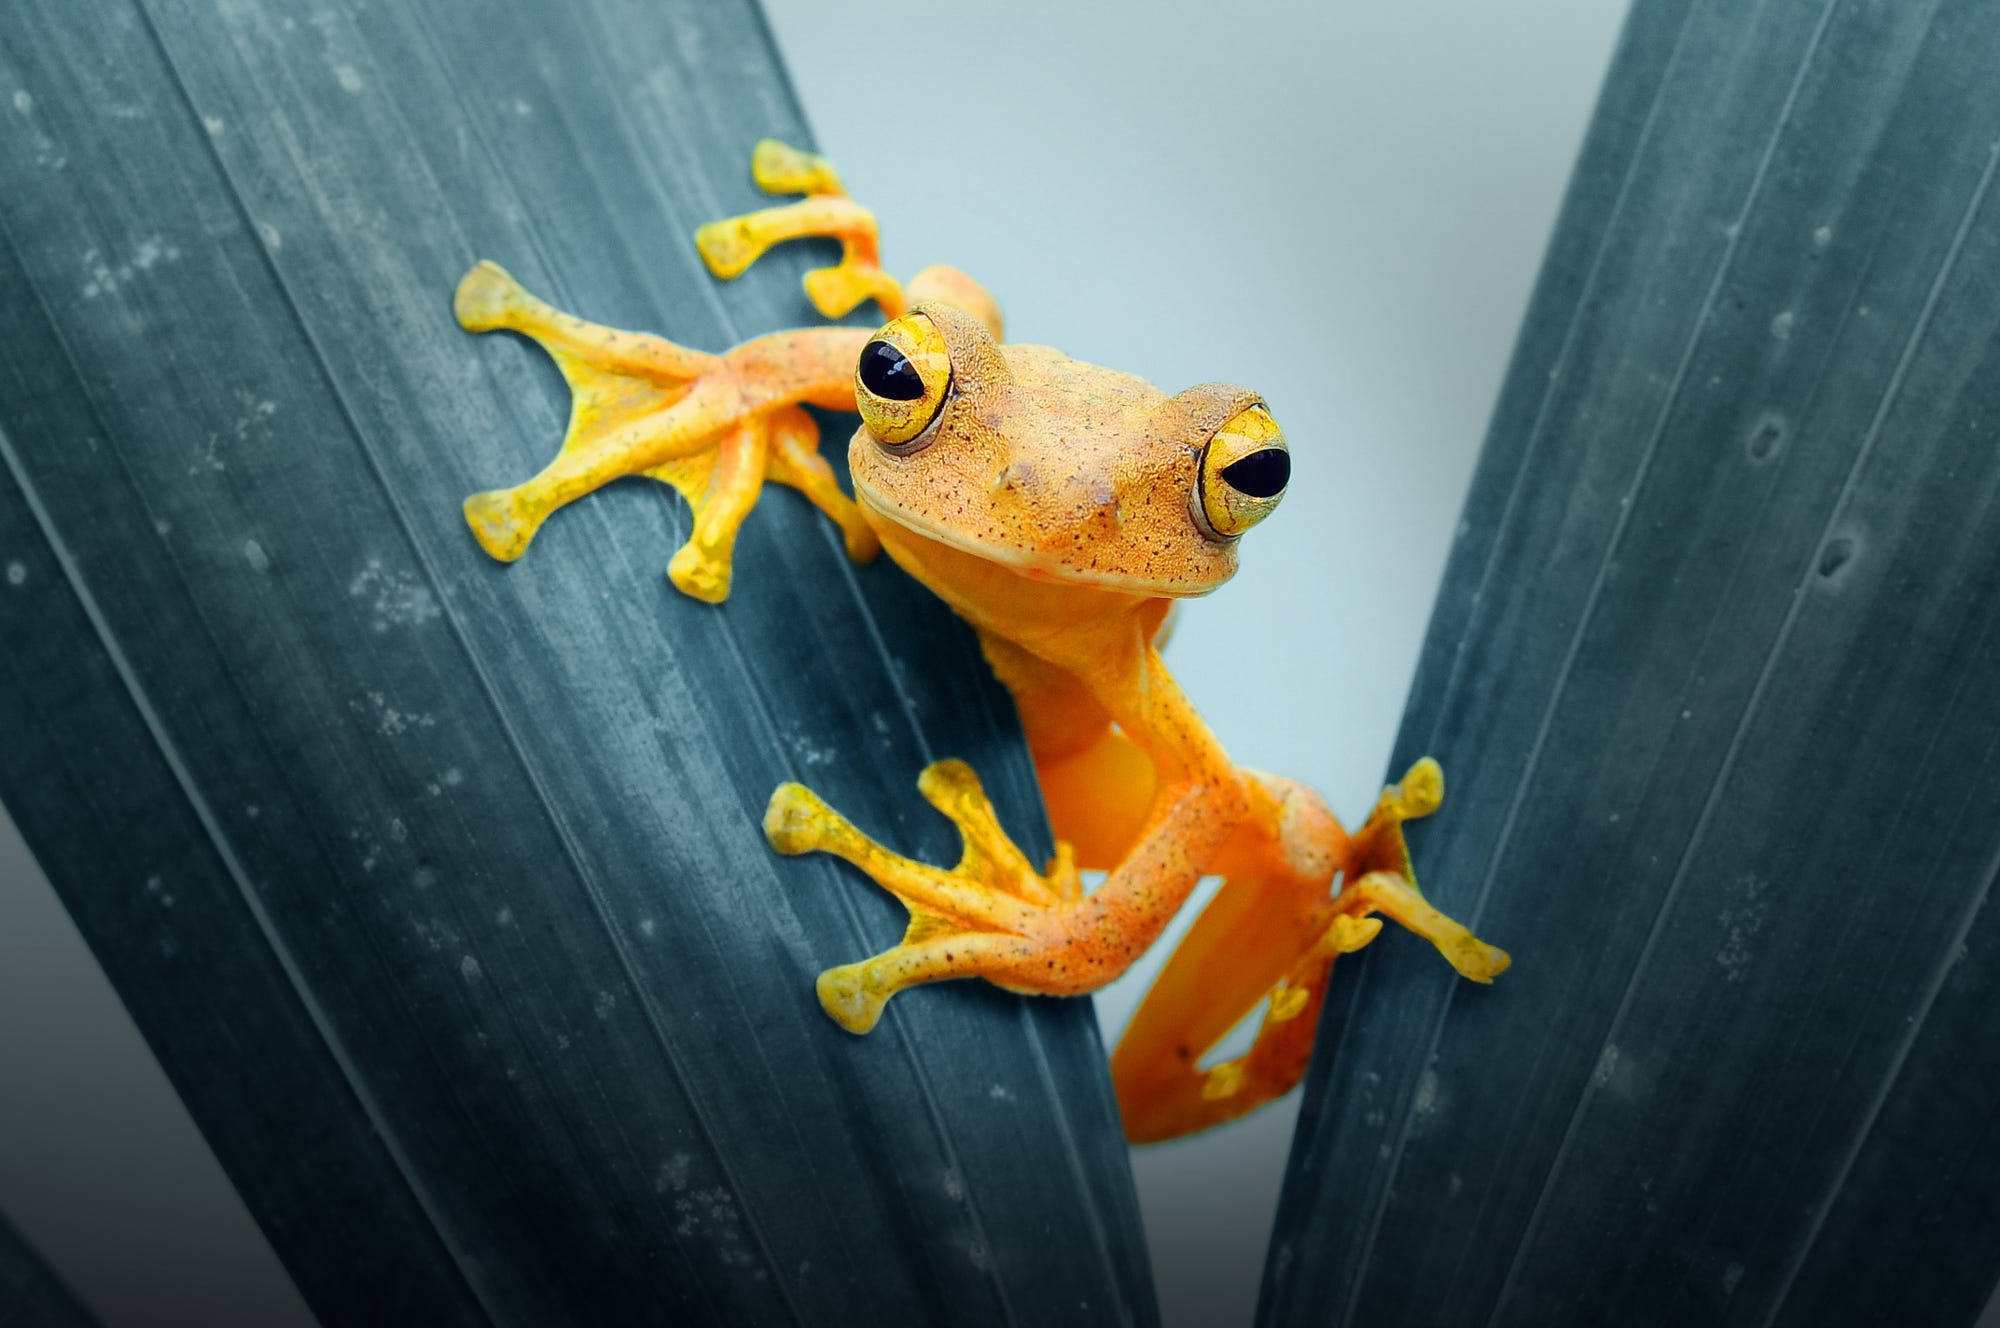 1920x10802019410 Amphibian HD Frog 1920x10802019410 Resolution Wallpaper,  HD Animals 4K Wallpapers, Images, Photos and Background - Wallpapers Den